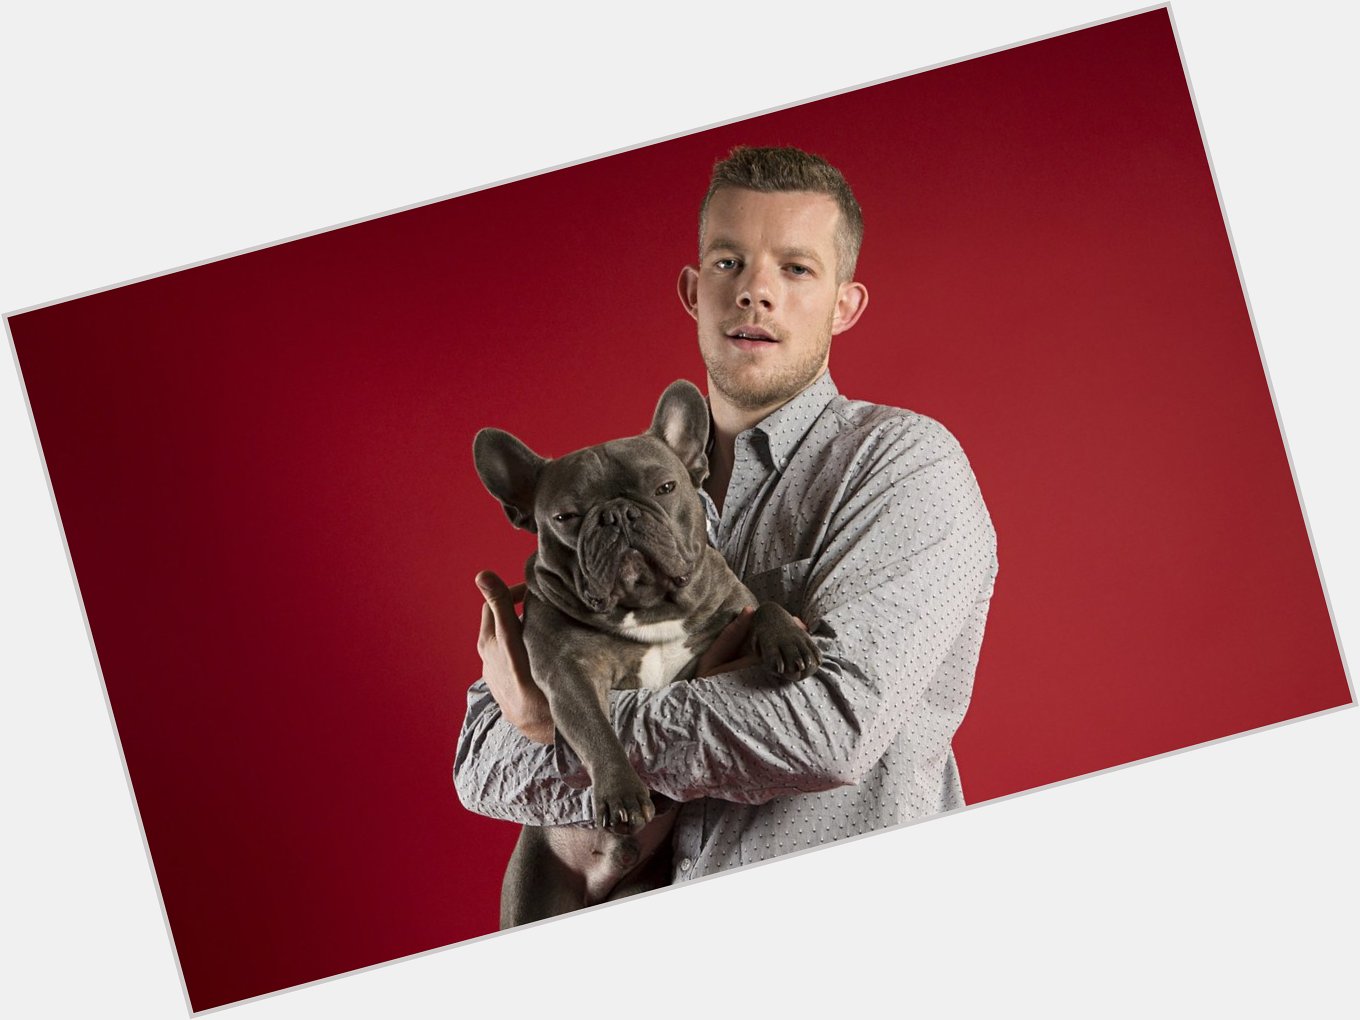 Happy Birthday to Russell Tovey. Here he is with a well cute puppy dog! 